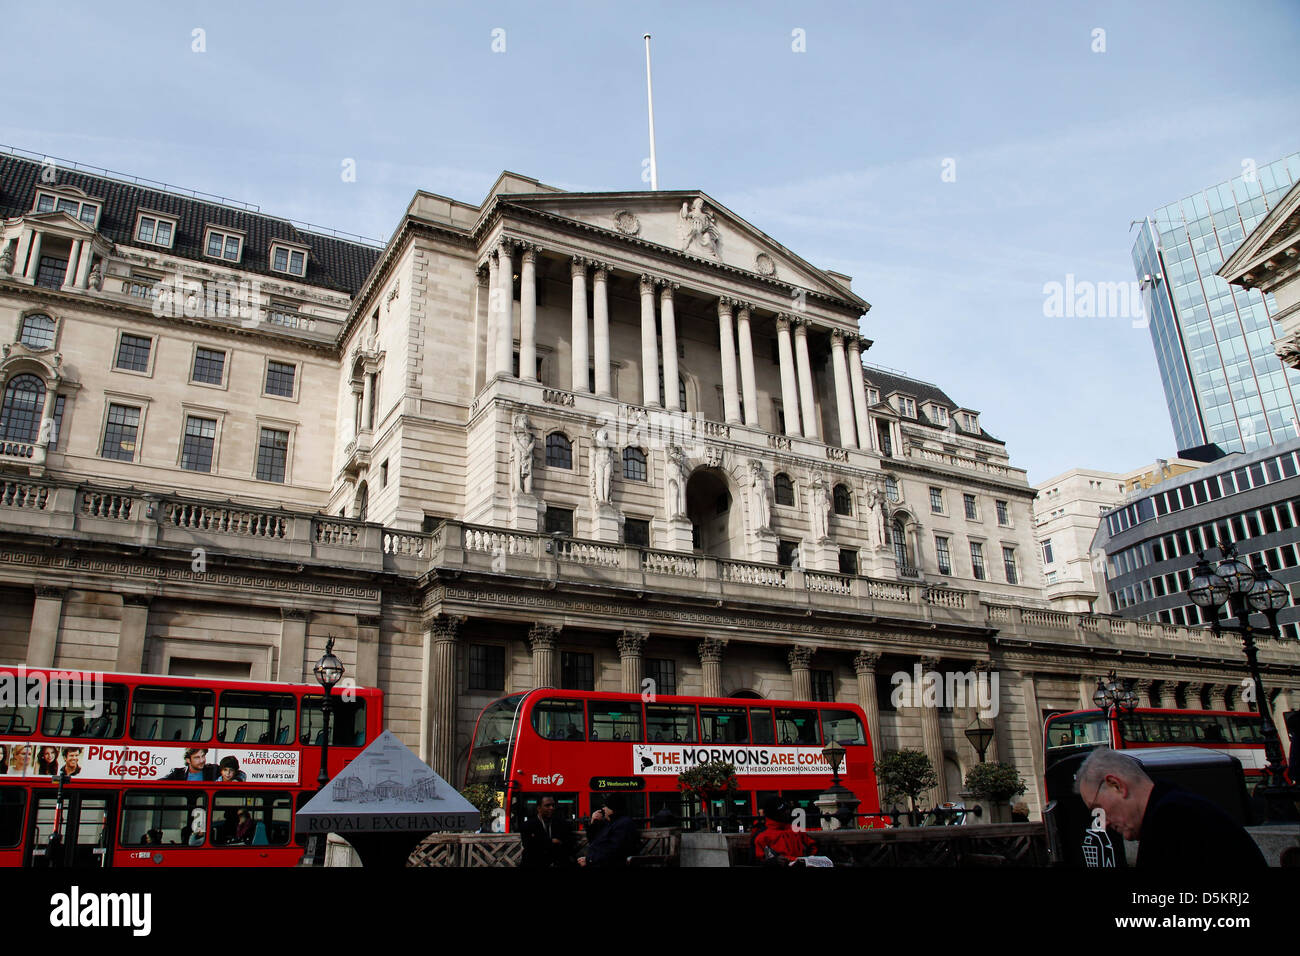 London,UK. 4th April 2013 - A general view of the Bank of England. Interest rates have been held at 0.5%. Credit: Rob Arnold/Alamy Live News  Photo created: 28/02/2013 Stock Photo